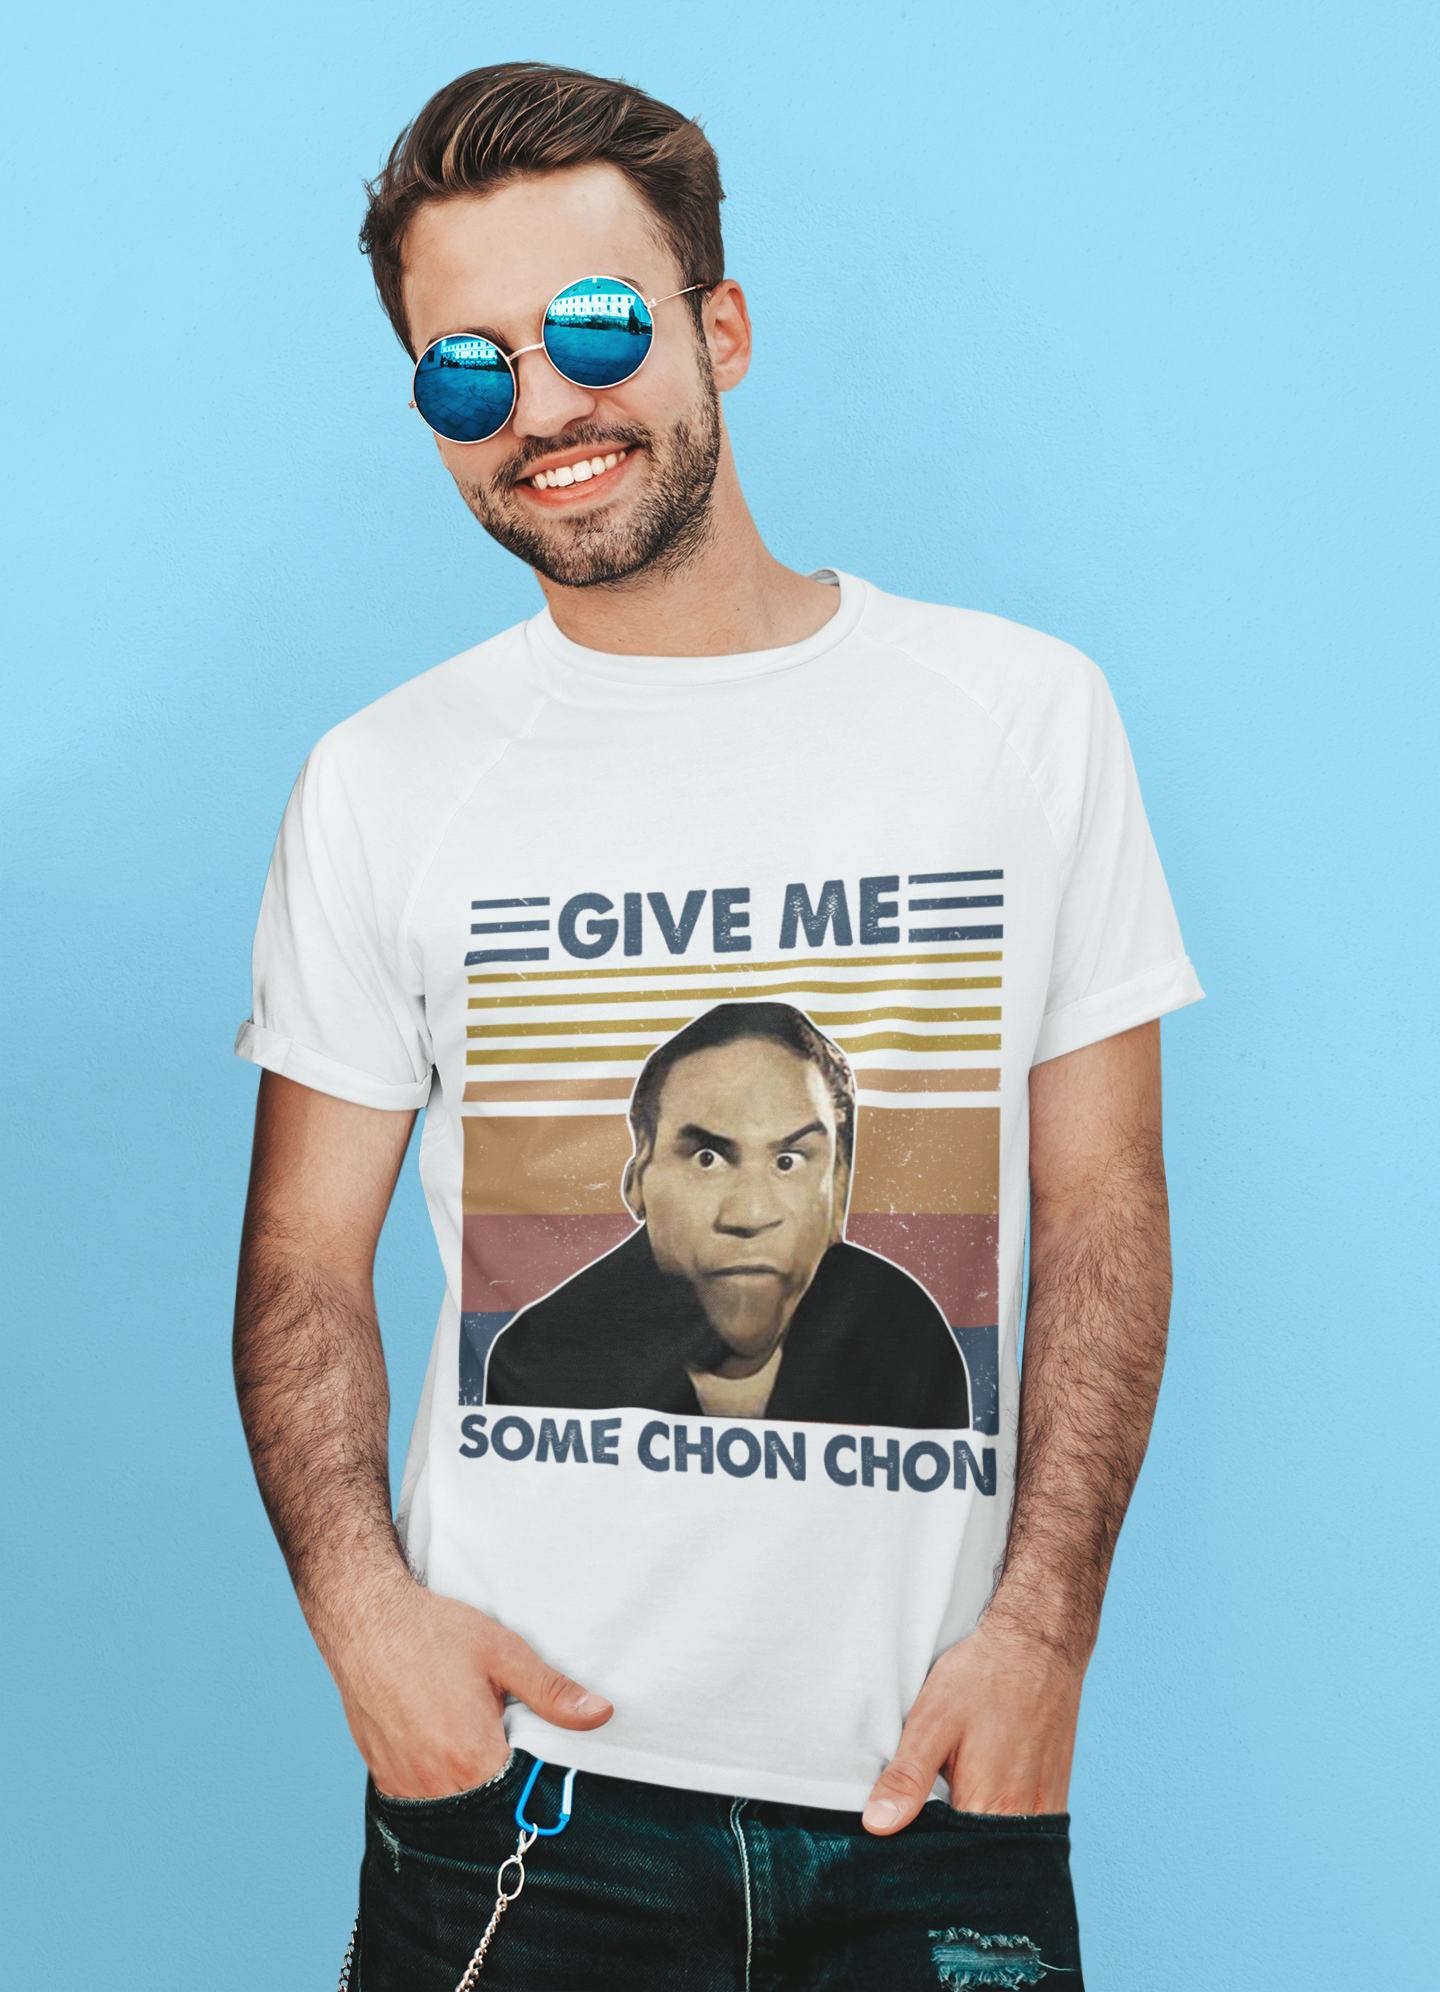 Blood In Blood Out Movie T Shirt, Give Me Some Chon Chon Tshirt, Popeye T Shirt